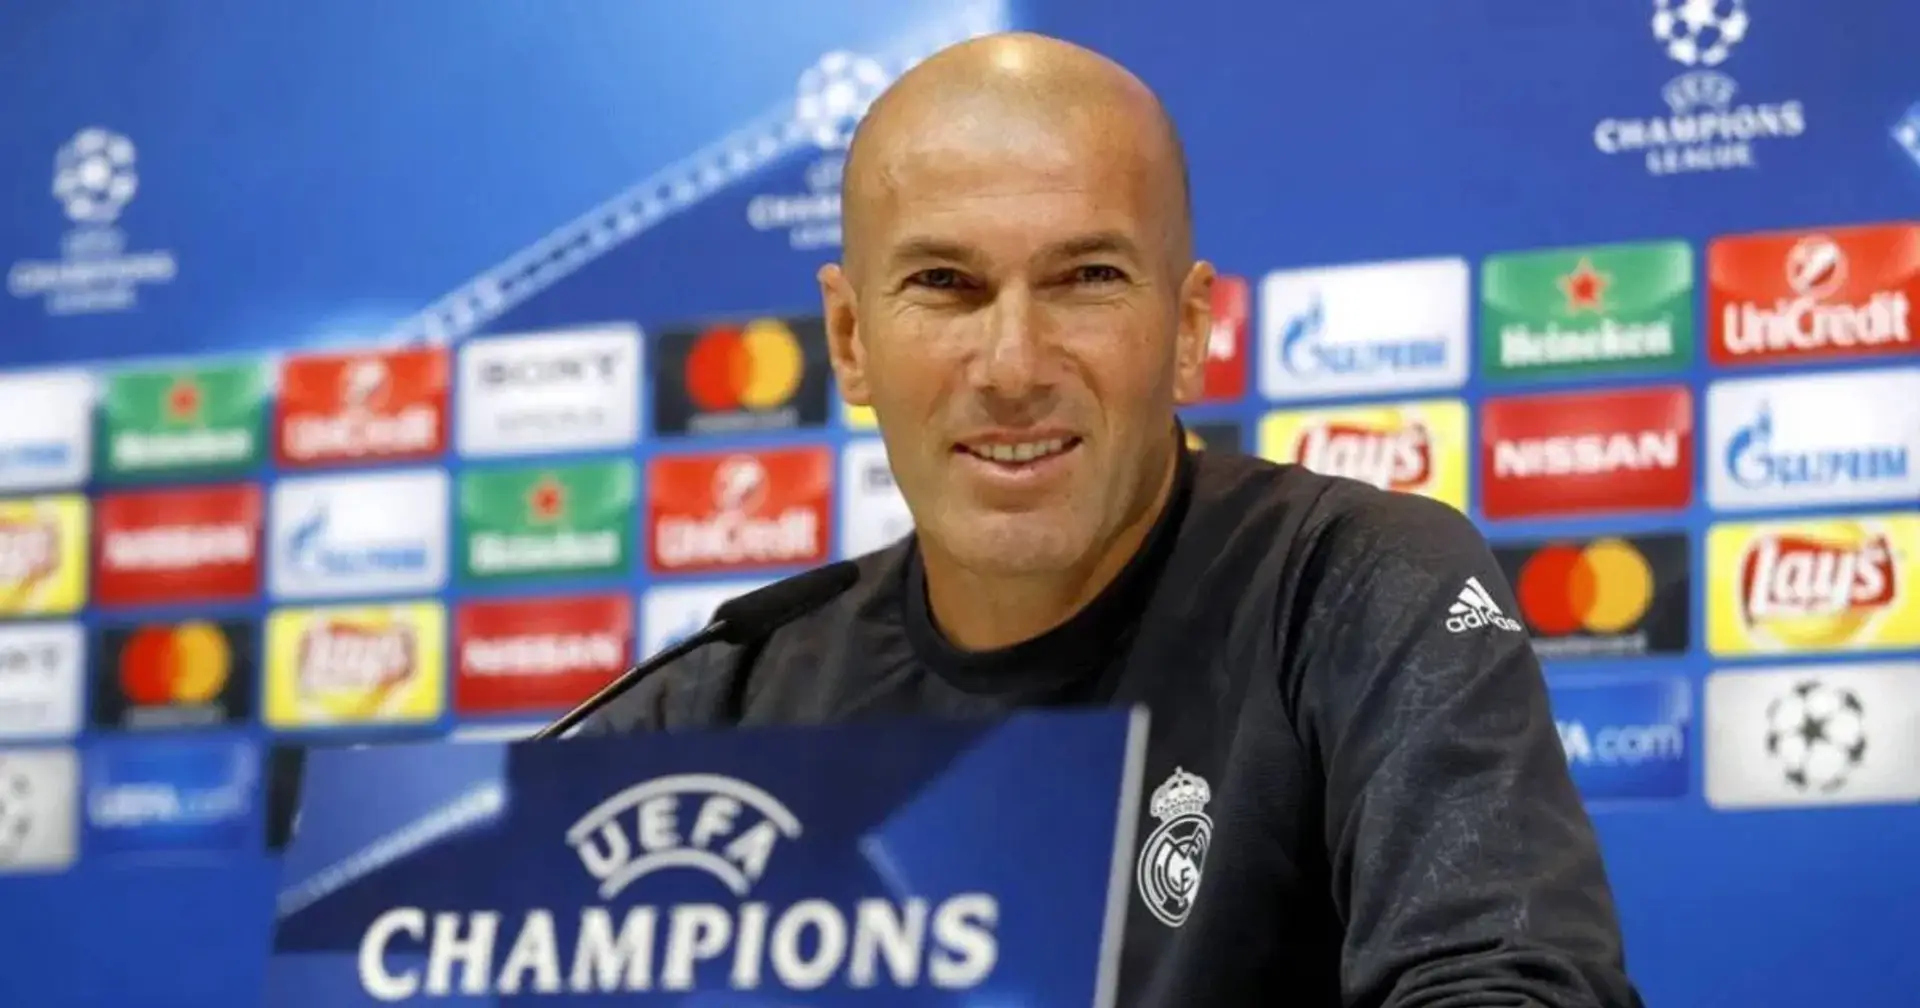 'You have to go a bit slowly with Asensio and Hazard': Zidane explains his substitutions vs Inter Milan 